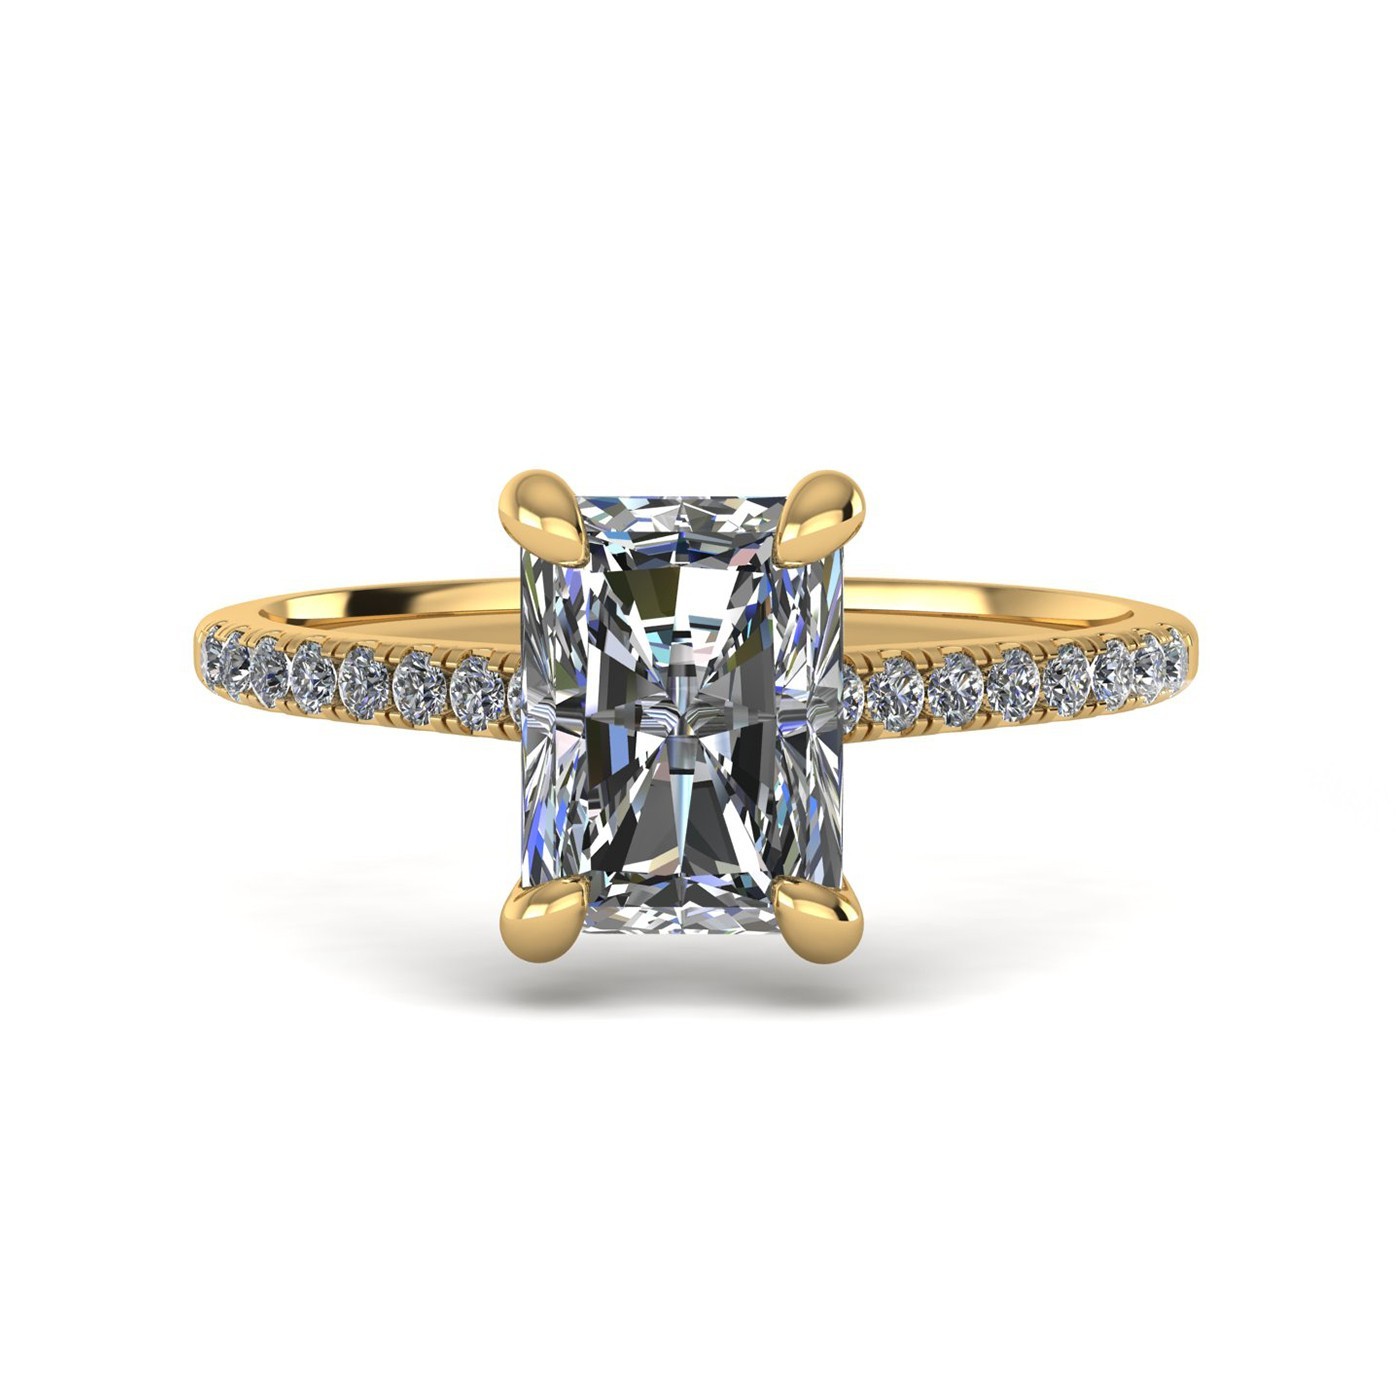 18k yellow gold  2,00 ct 4 prongs radiant cut diamond engagement ring with whisper thin pavÉ set band Photos & images